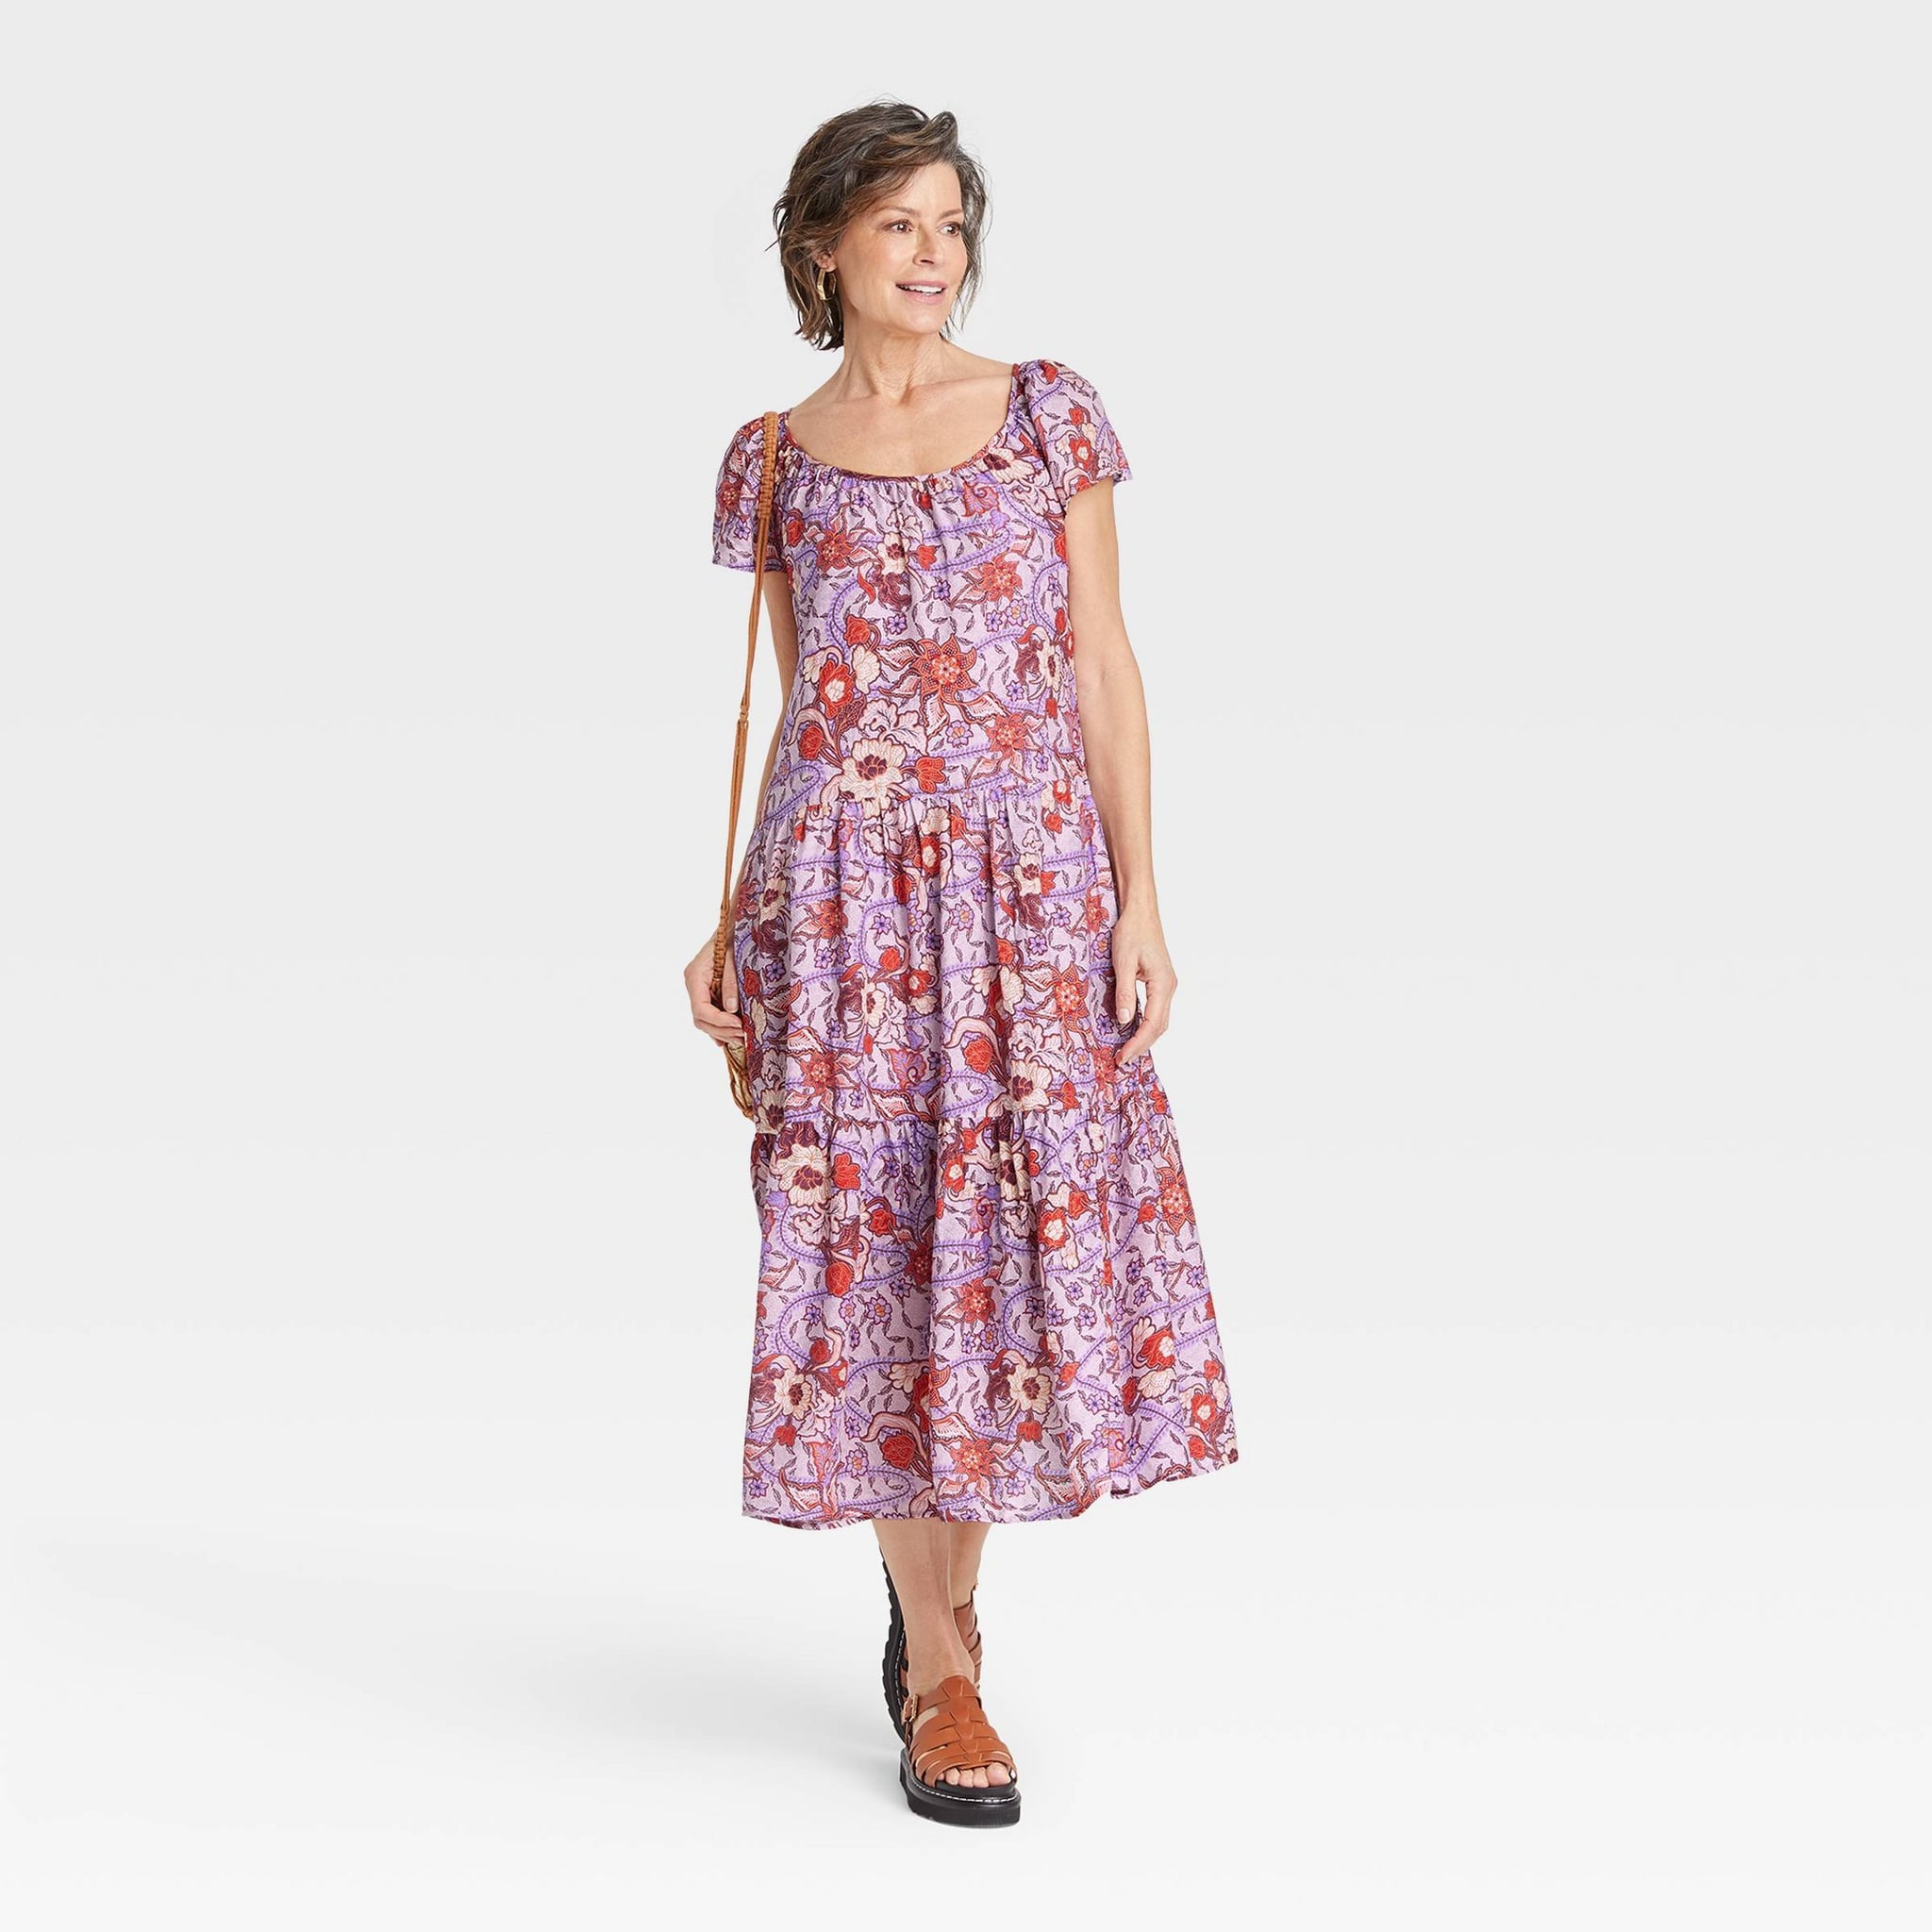 A Floral Dress: Knox Rose Flutter Short Sleeve A-Line Dress, 12 Target  Maxi Dresses to Wear Now and Forever